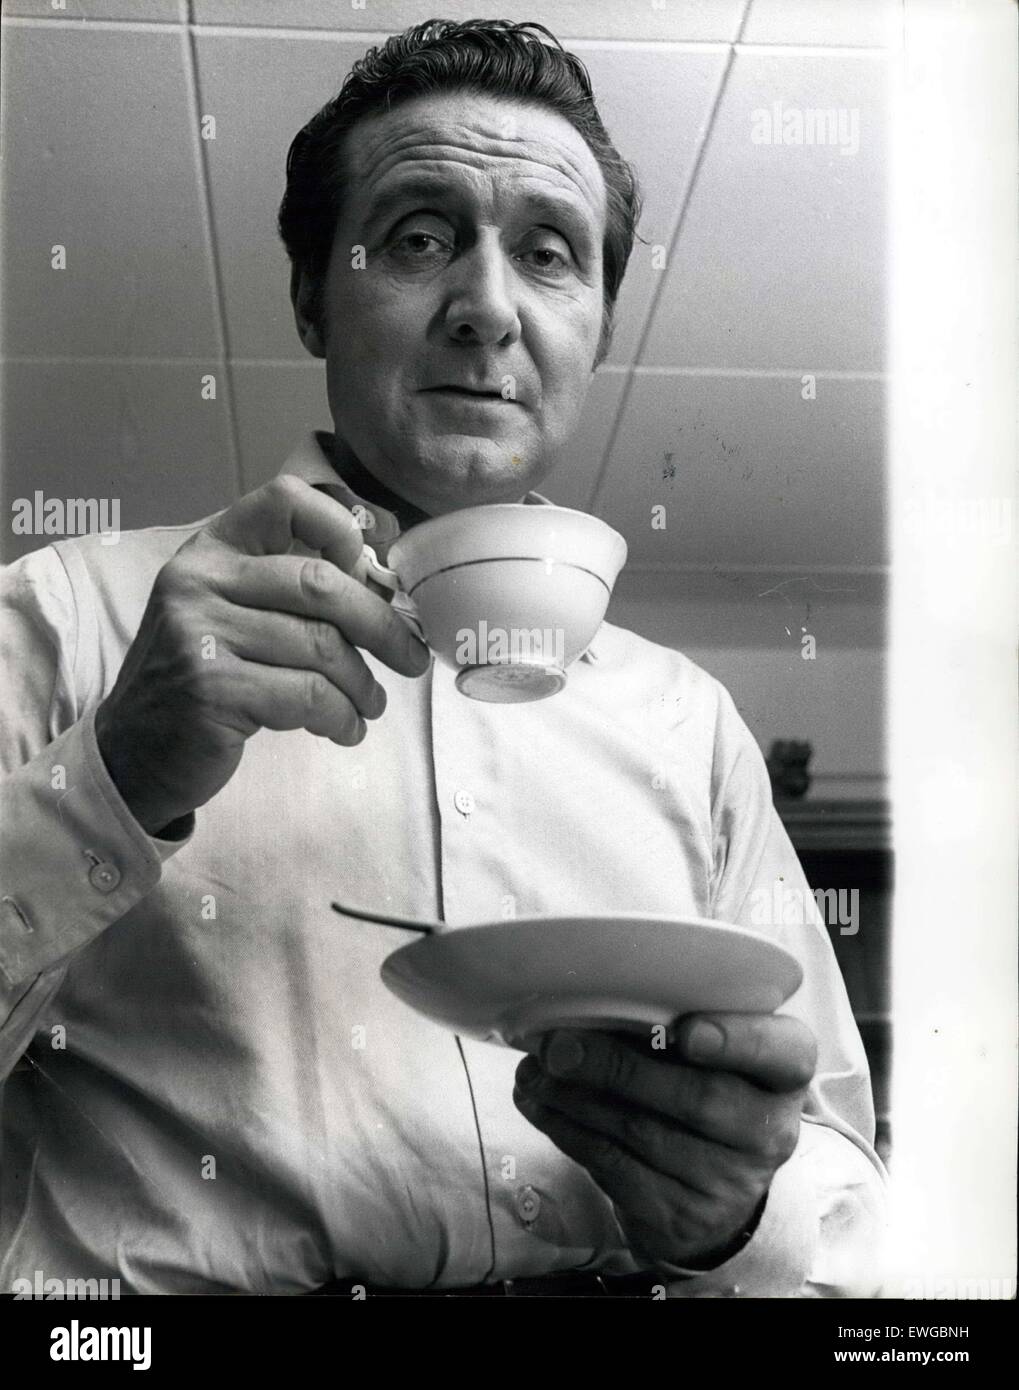 June 25, 2015 - Actor PATRICK MACNEE, star of 'The Avengers' TV series, has died in California at the age of 93. The Briton, best known for playing John Steed in the 1960s television series, died at home with his family at his bedside. Macnee also played roles in theatre, appearing on Broadway, and served in the Royal Navy during World War Two. Pictured: 1970 - Patrick MacNee 'John Steed' in 'The Avengers' television series takes a short break between takes to enjoy a cup of tea. (Credit Image: © Keystone Press Agency/Keystone USA via ZUMAPRESS.com) Stock Photo